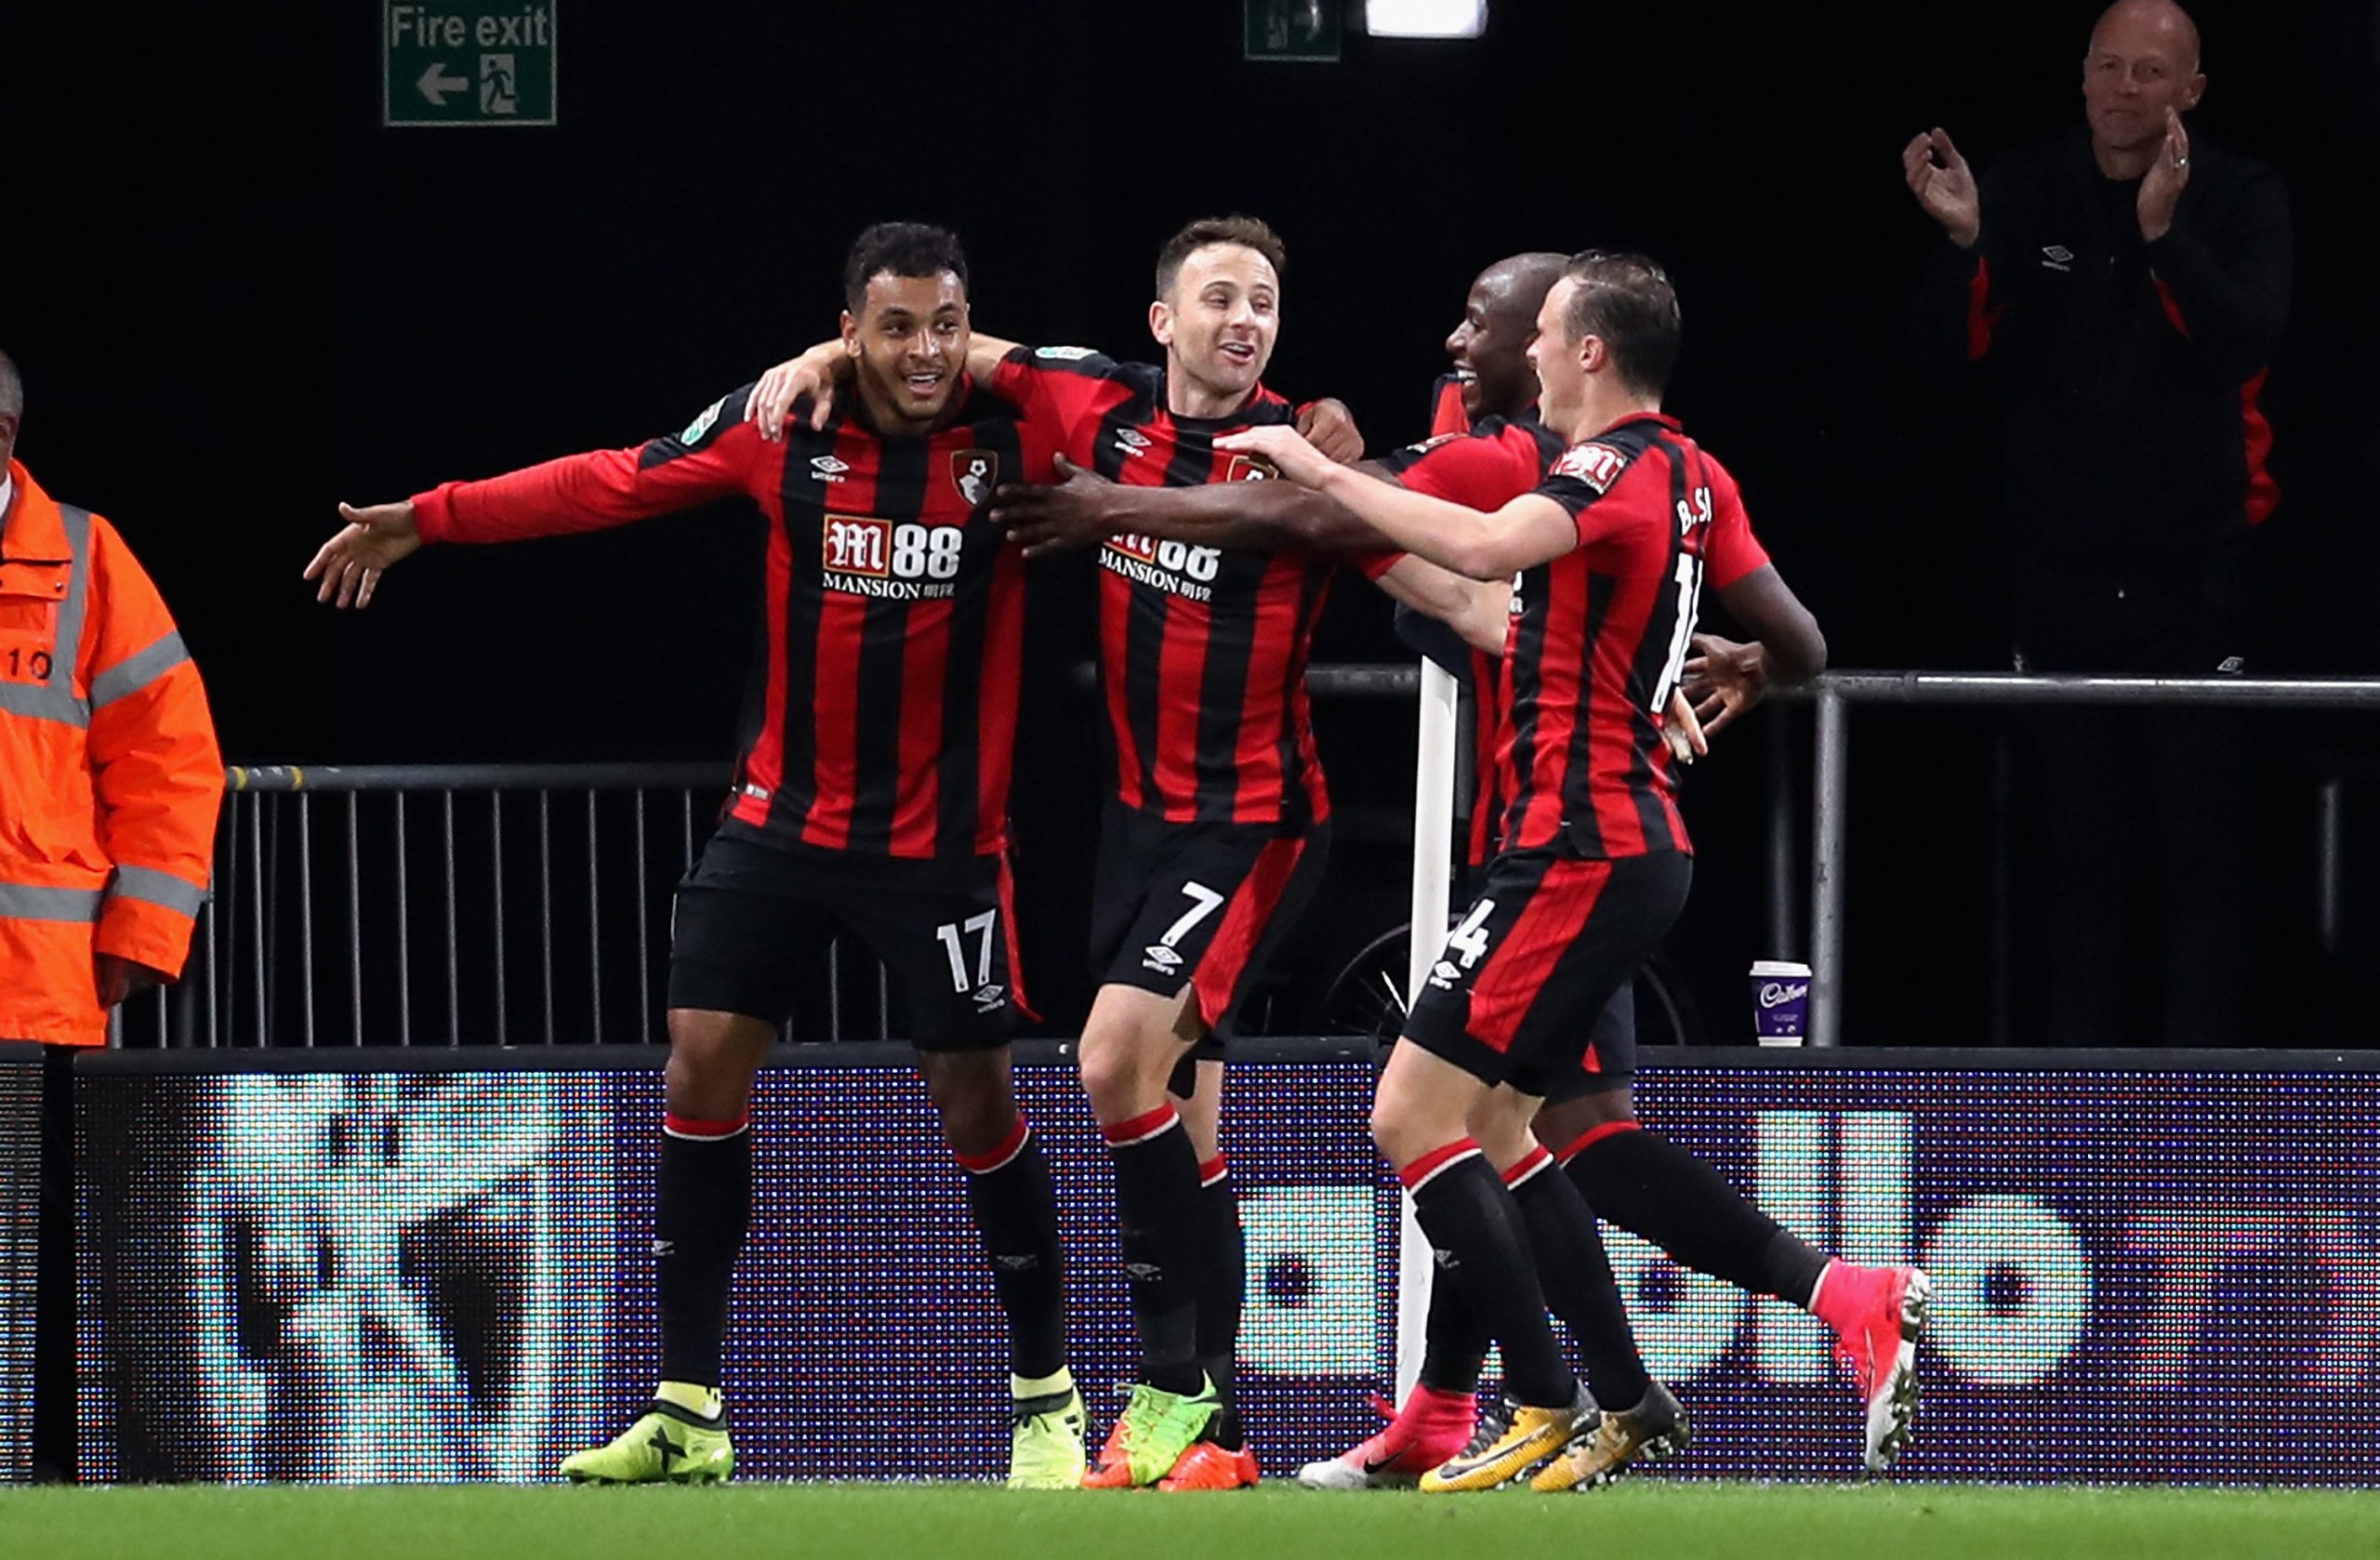 BOURNEMOUTH, ENGLAND - SEPTEMBER 19:  Joshua King of AFC Bournemouth celebrates scoring his sides first goal with team mates during the Carabao Cup Third Round match between AFC Bournemouth and Brighton and Hove Albion at Vitality Stadium on September 19, 2017 in Bournemouth, England.  (Photo by Christopher Lee/Getty Images)